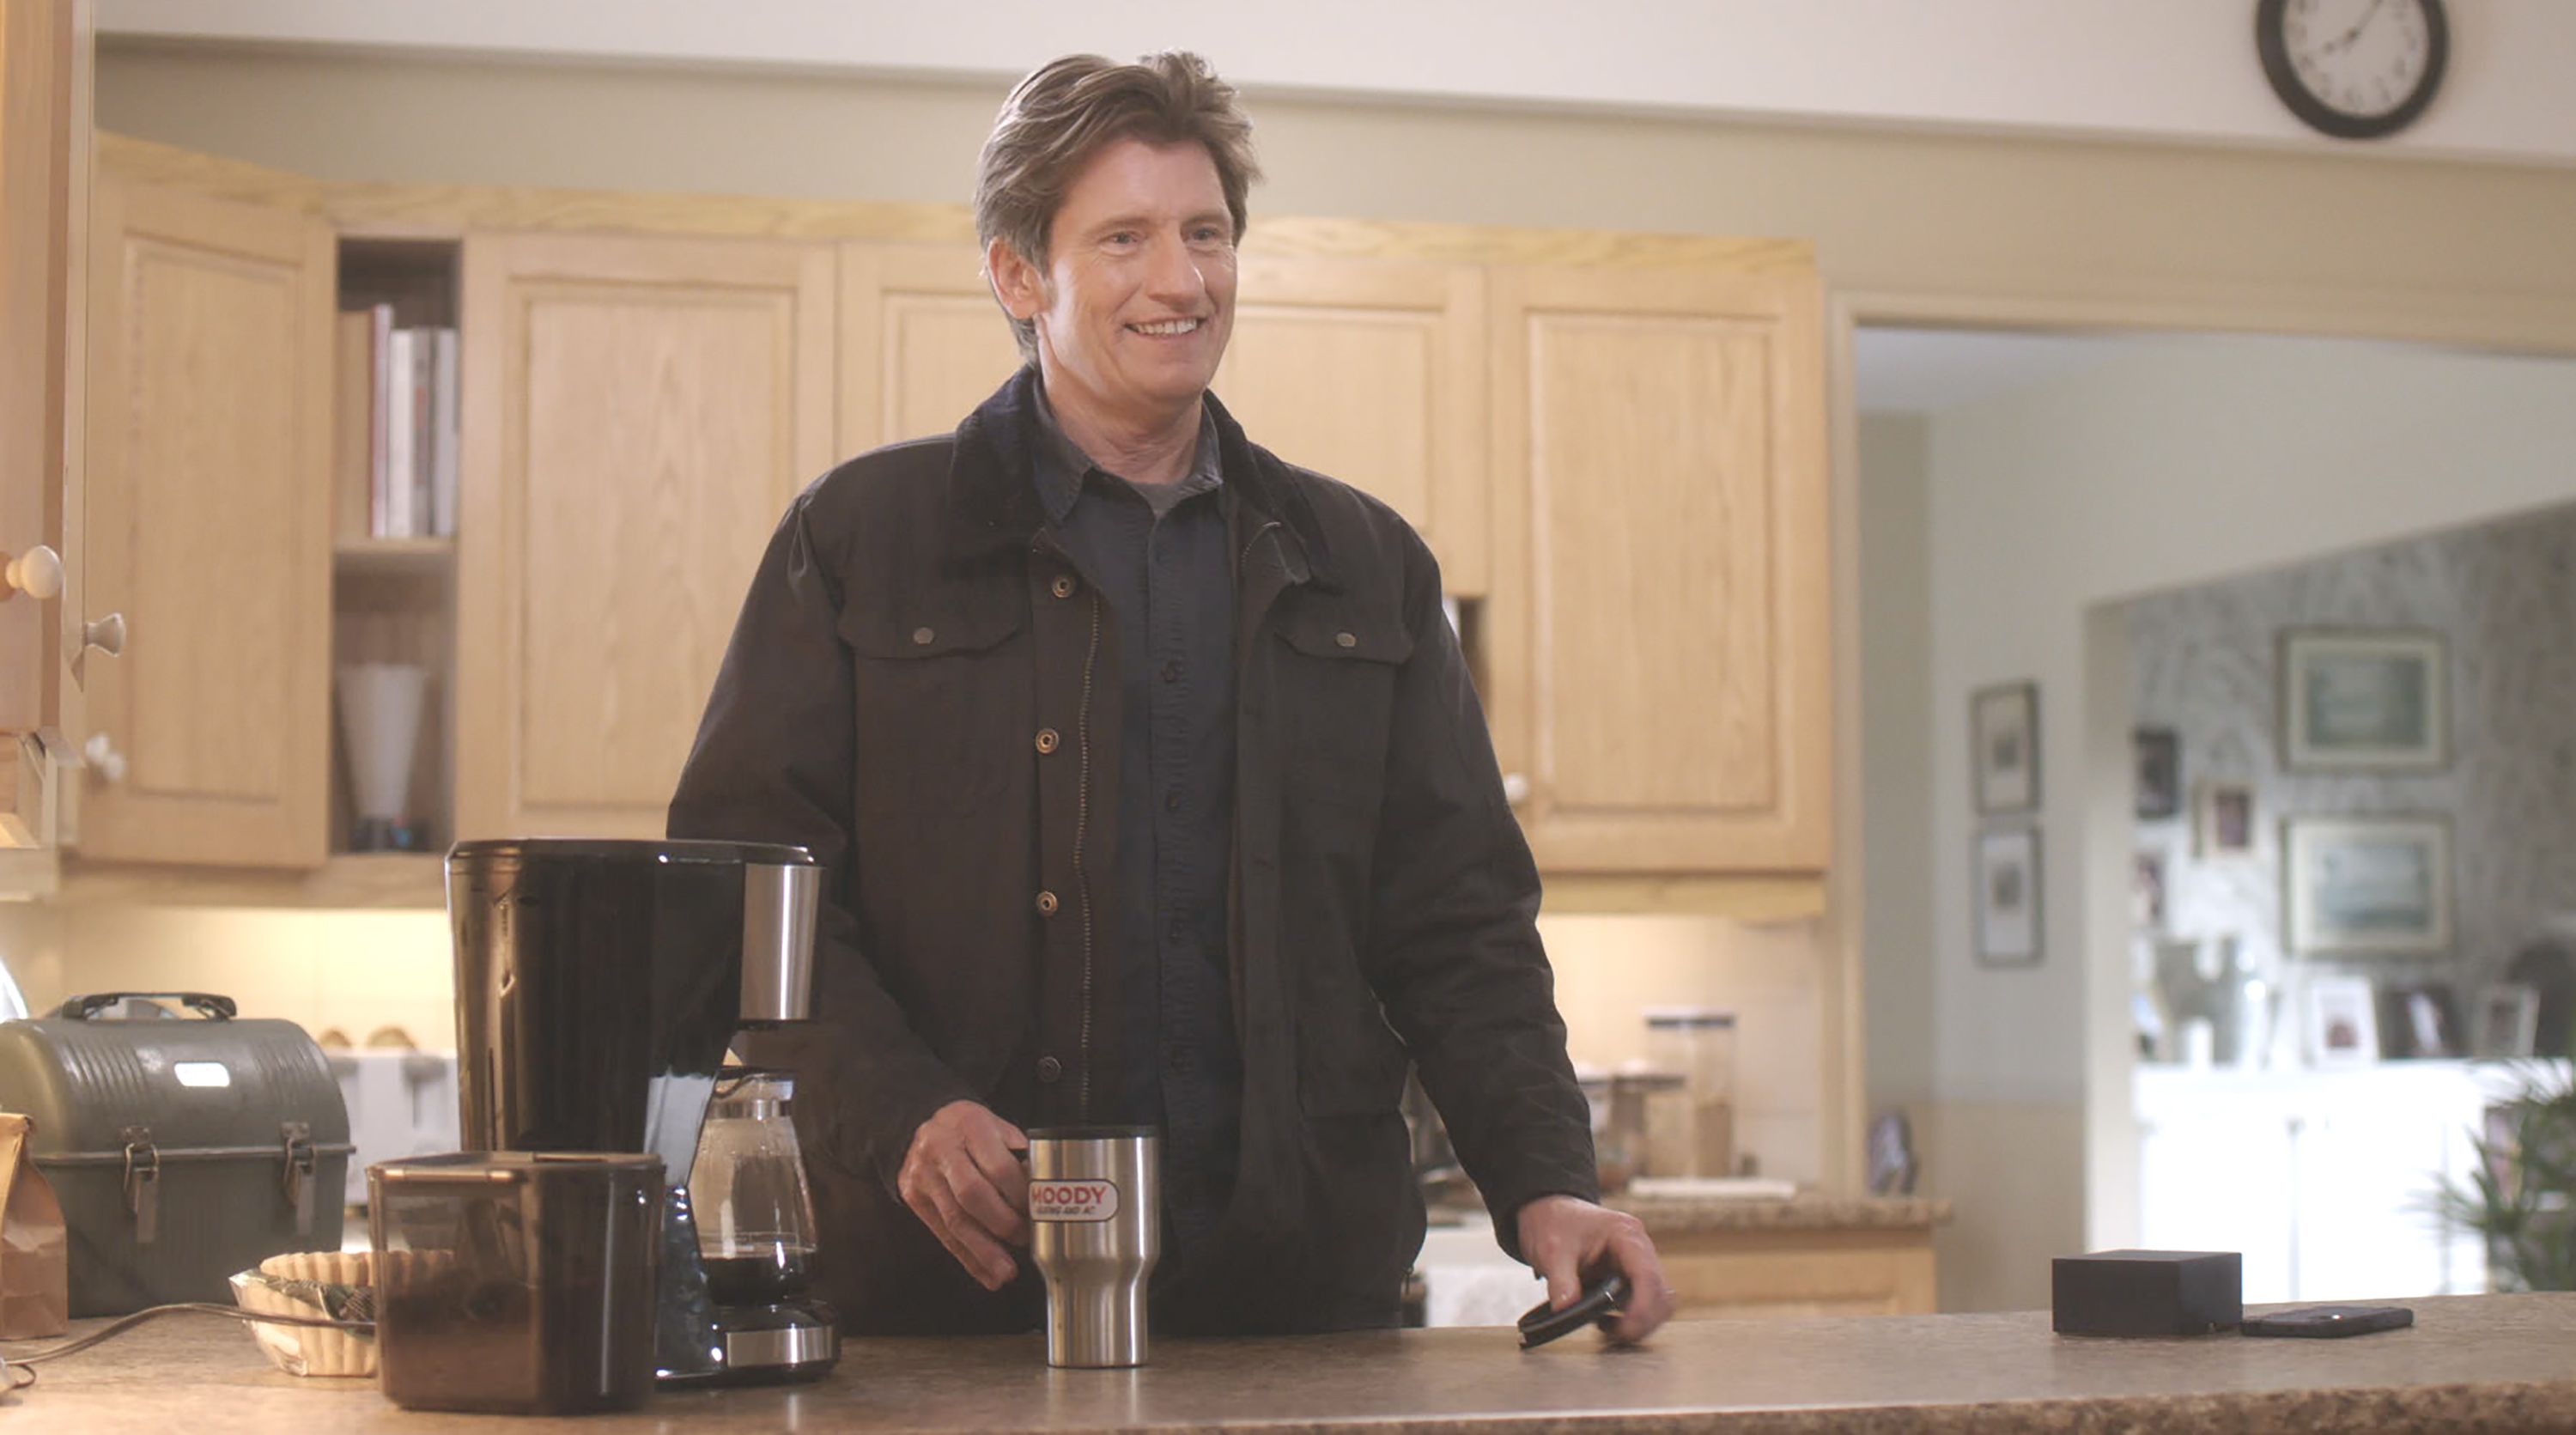 THE MOODYS: Denis Leary in the "Episode 3" time period premiere episode of THE MOODYS airing Thursday, April 8 (9:30-10:00 PM ET/PT) on FOX. ©2021 FOX MEDIA LLC. Cr. Cr: FOX.